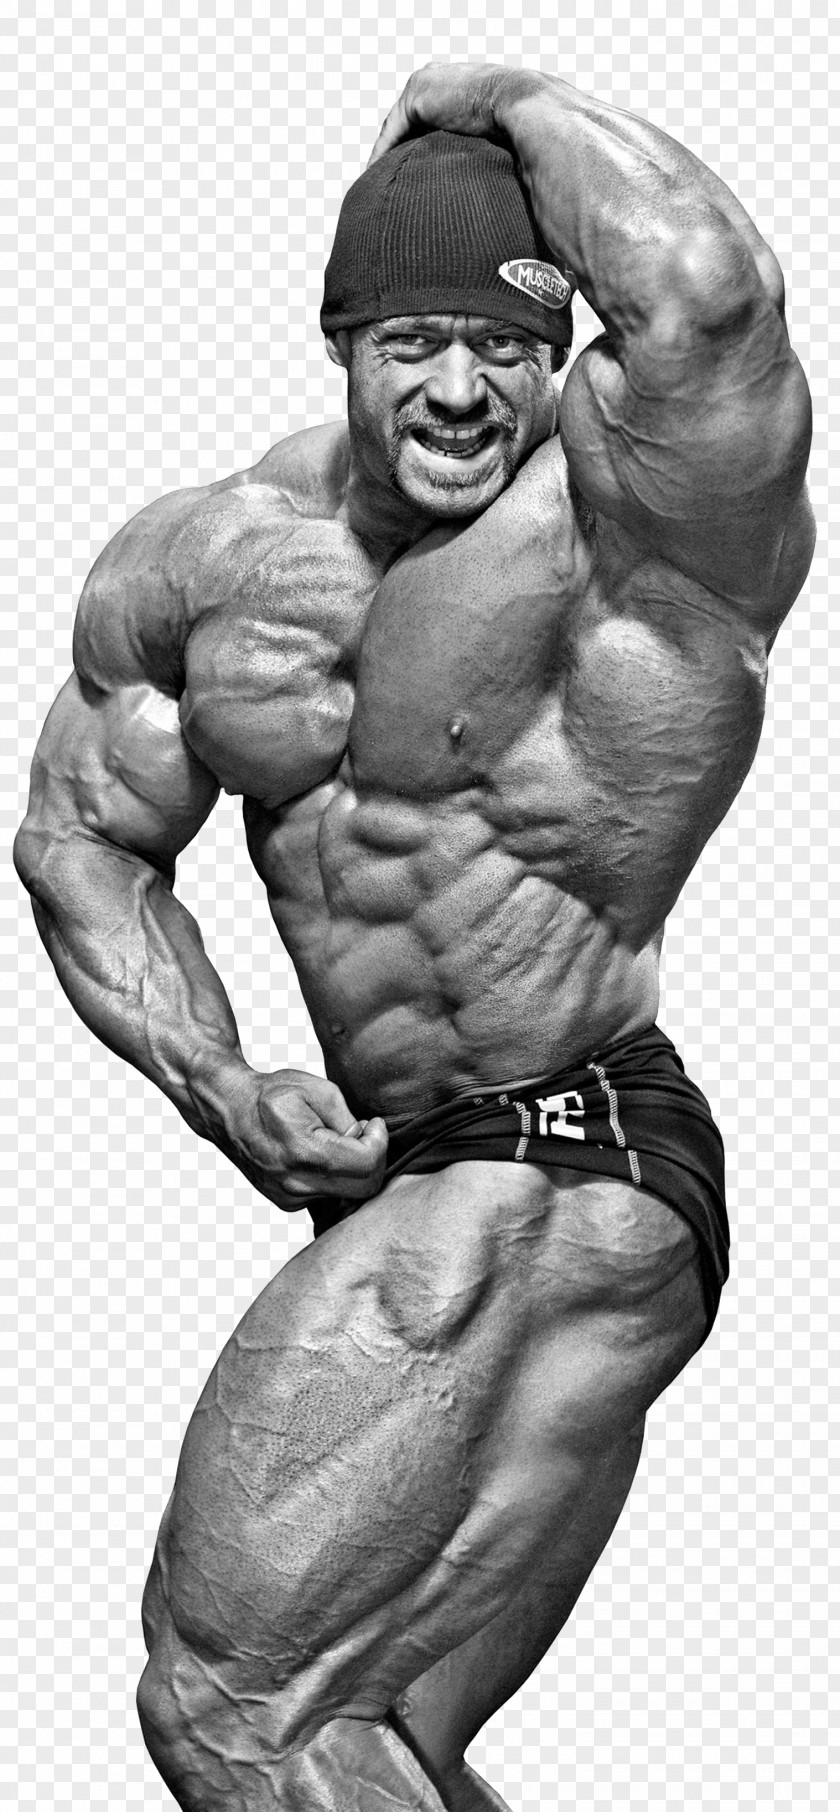 Bodybuilding Transparent Image Branch Warren Mr. Olympia International Federation Of BodyBuilding & Fitness Physical Exercise PNG